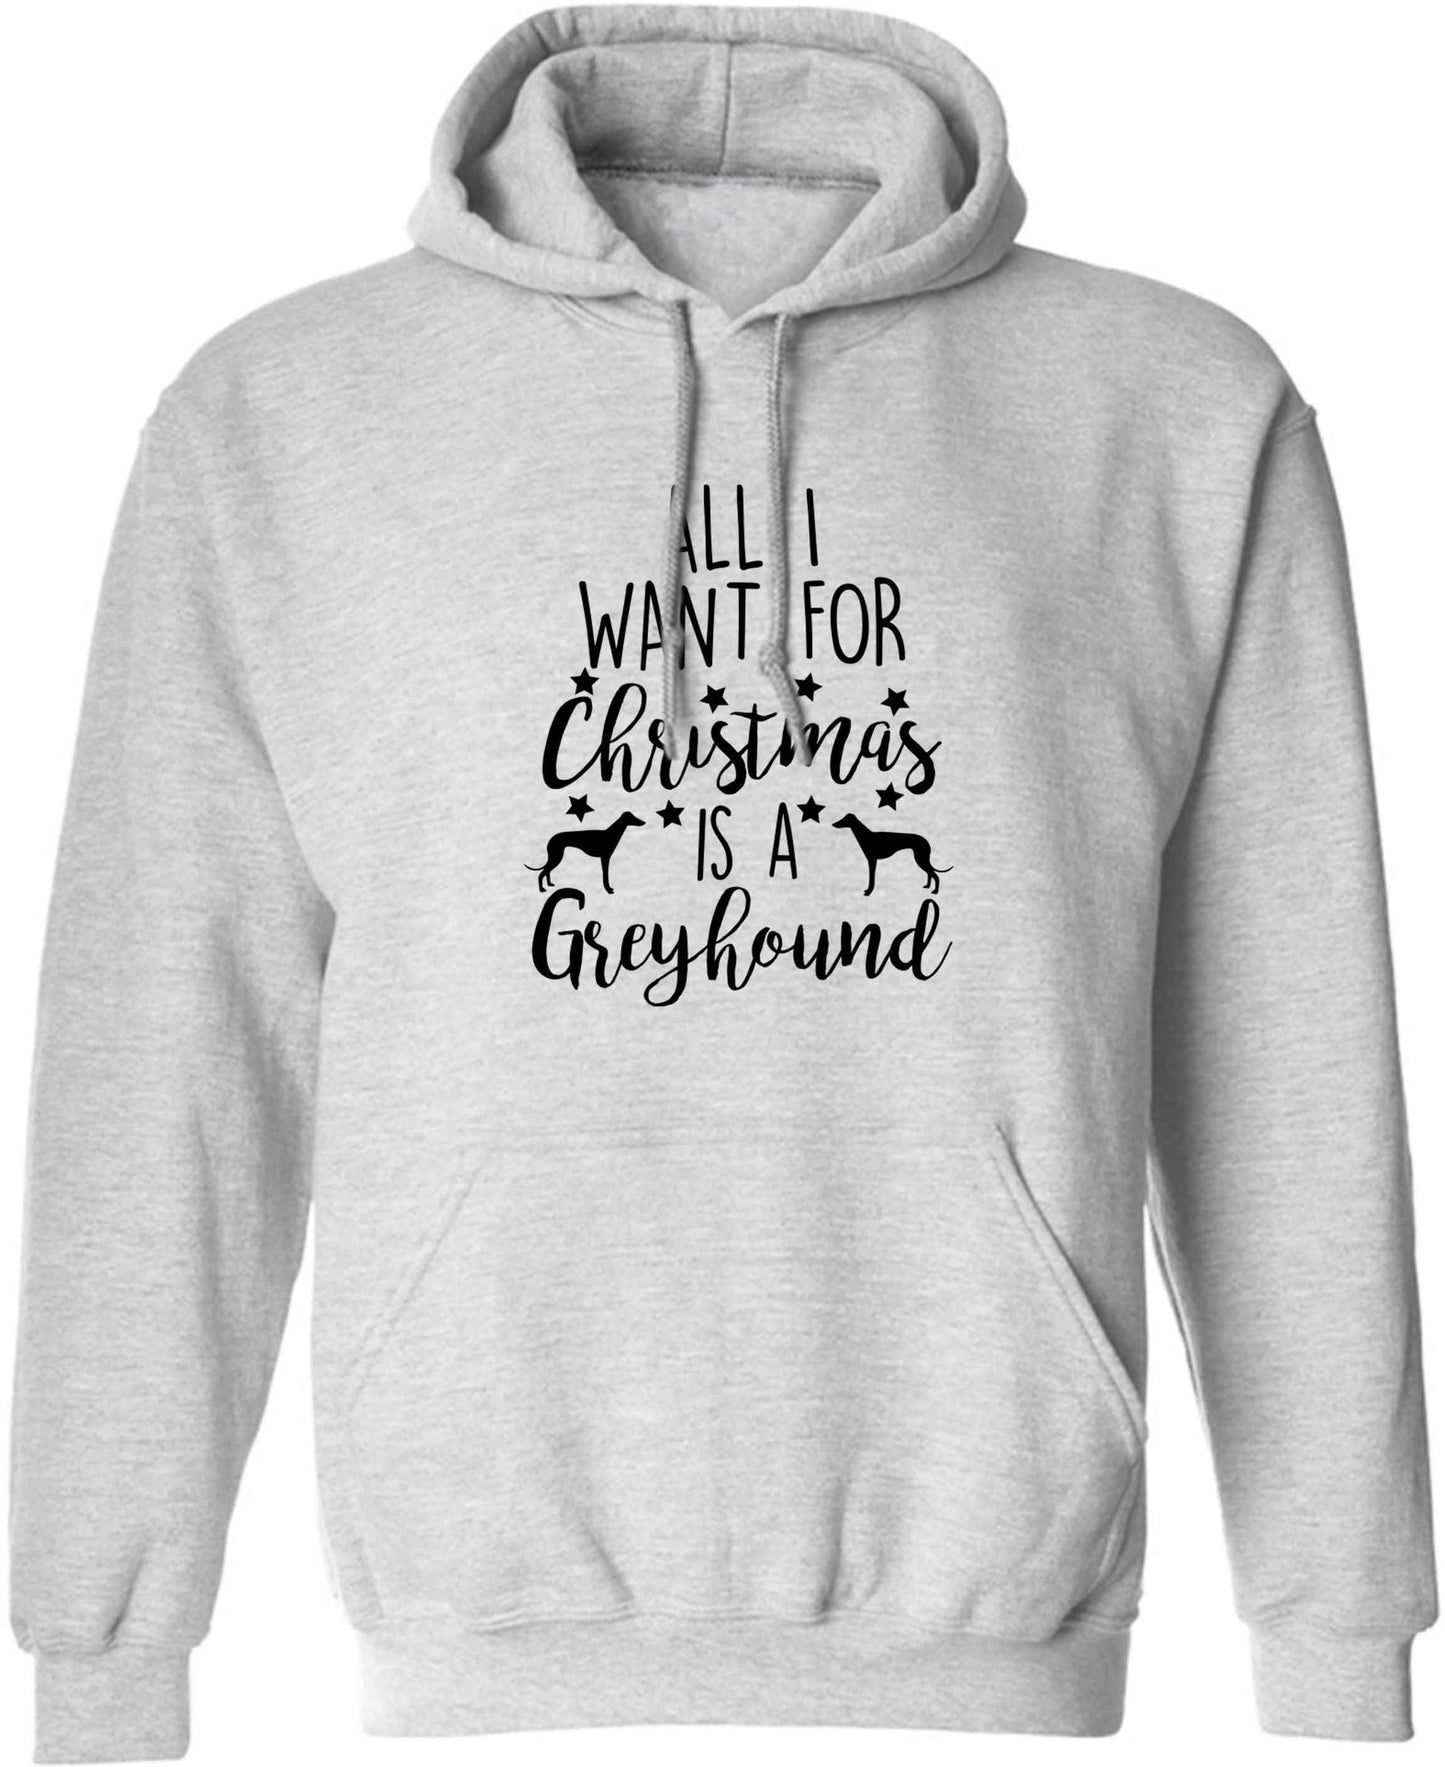 All I want for Christmas is a greyhound adults unisex grey hoodie 2XL